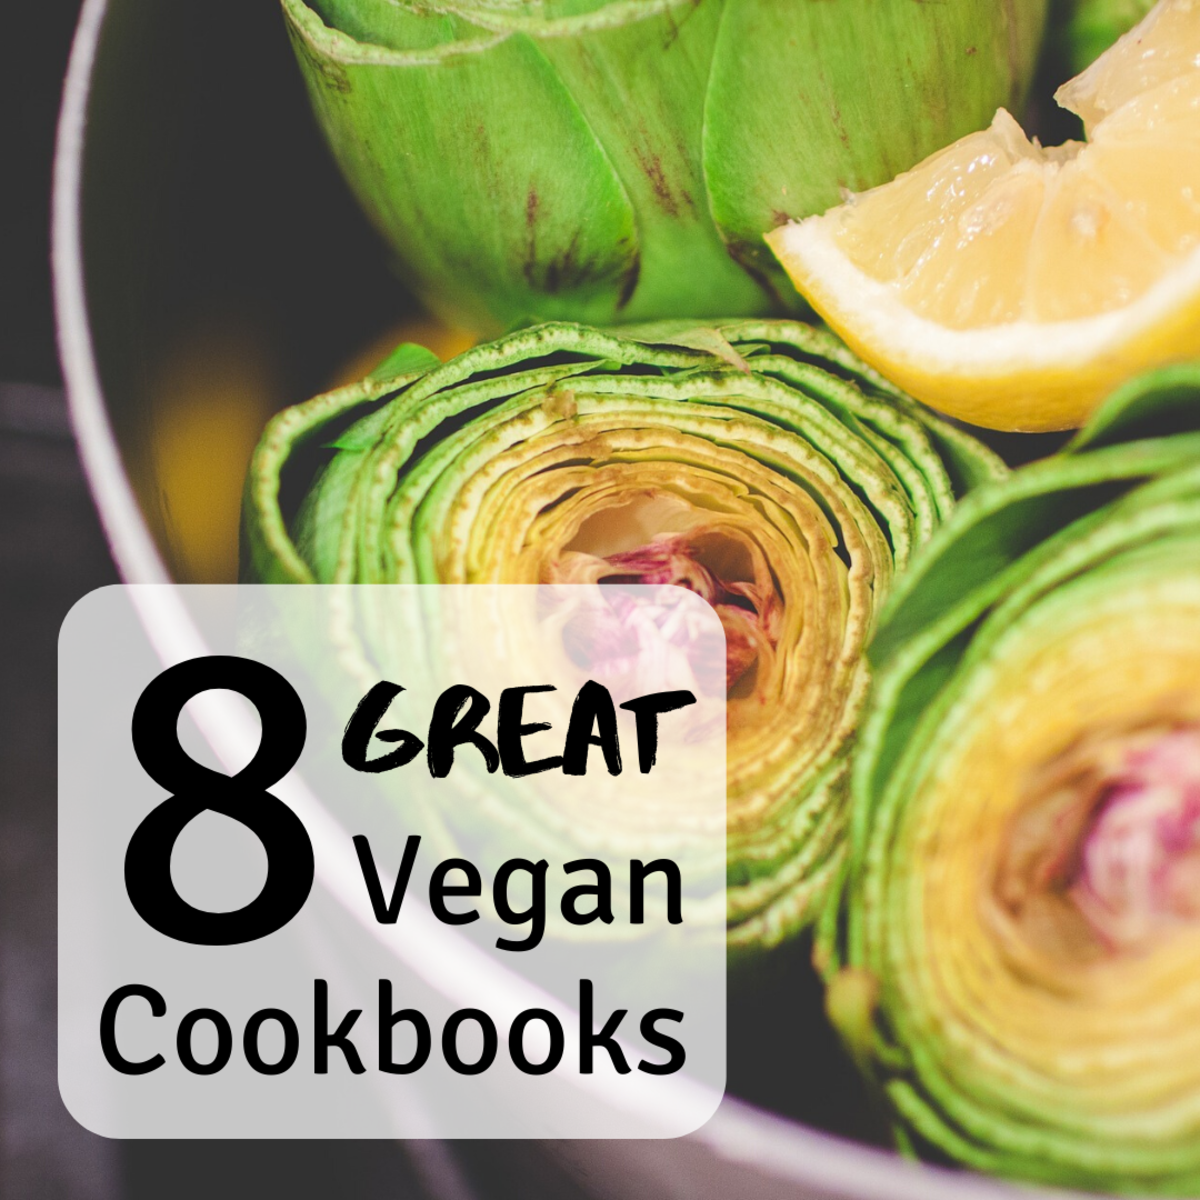 Top 8 Vegan Cookbooks for Both Beginners and Connoisseurs